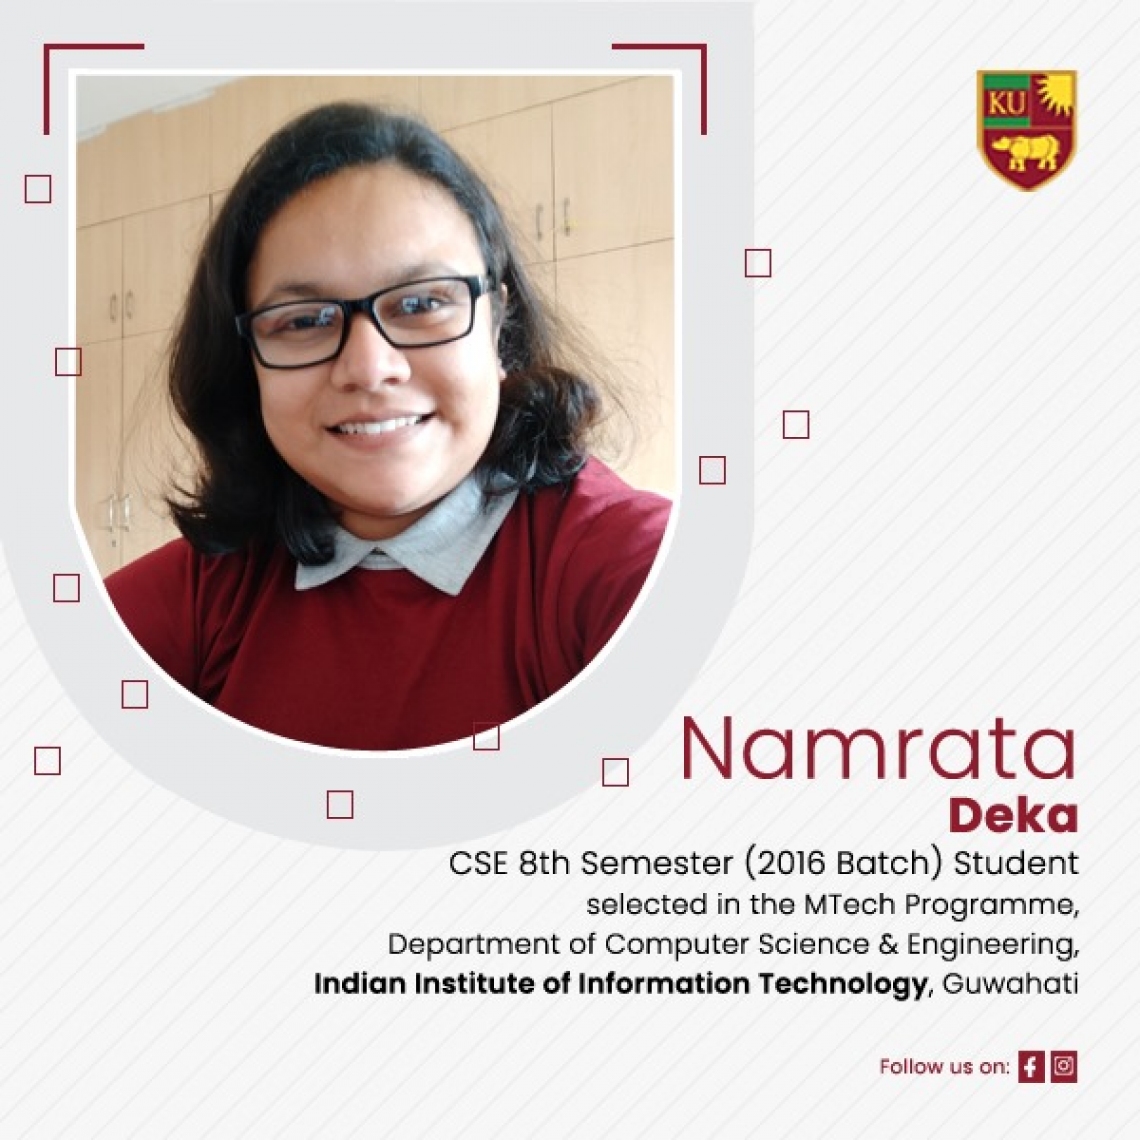 Ms Namrata Deka from CSE, 8th semester at Indian Institute of Information and Technology, Guwahati for their M.Tech Programme